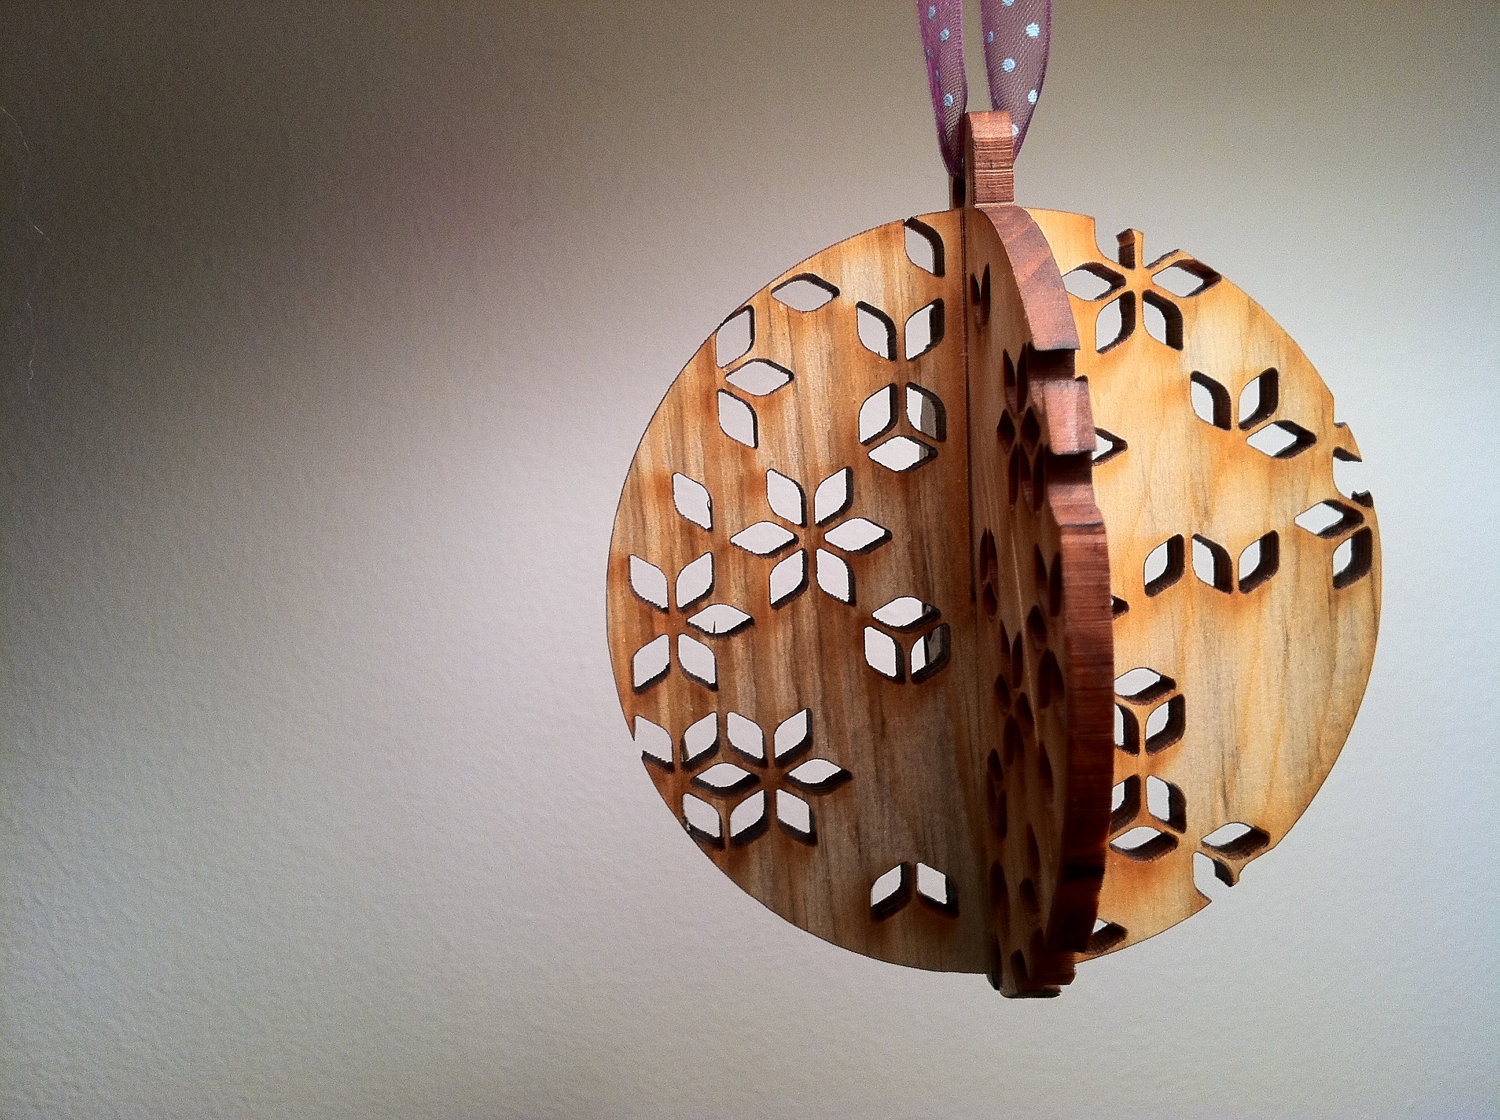 Wooden Christmas Ornaments Pictures & Photos